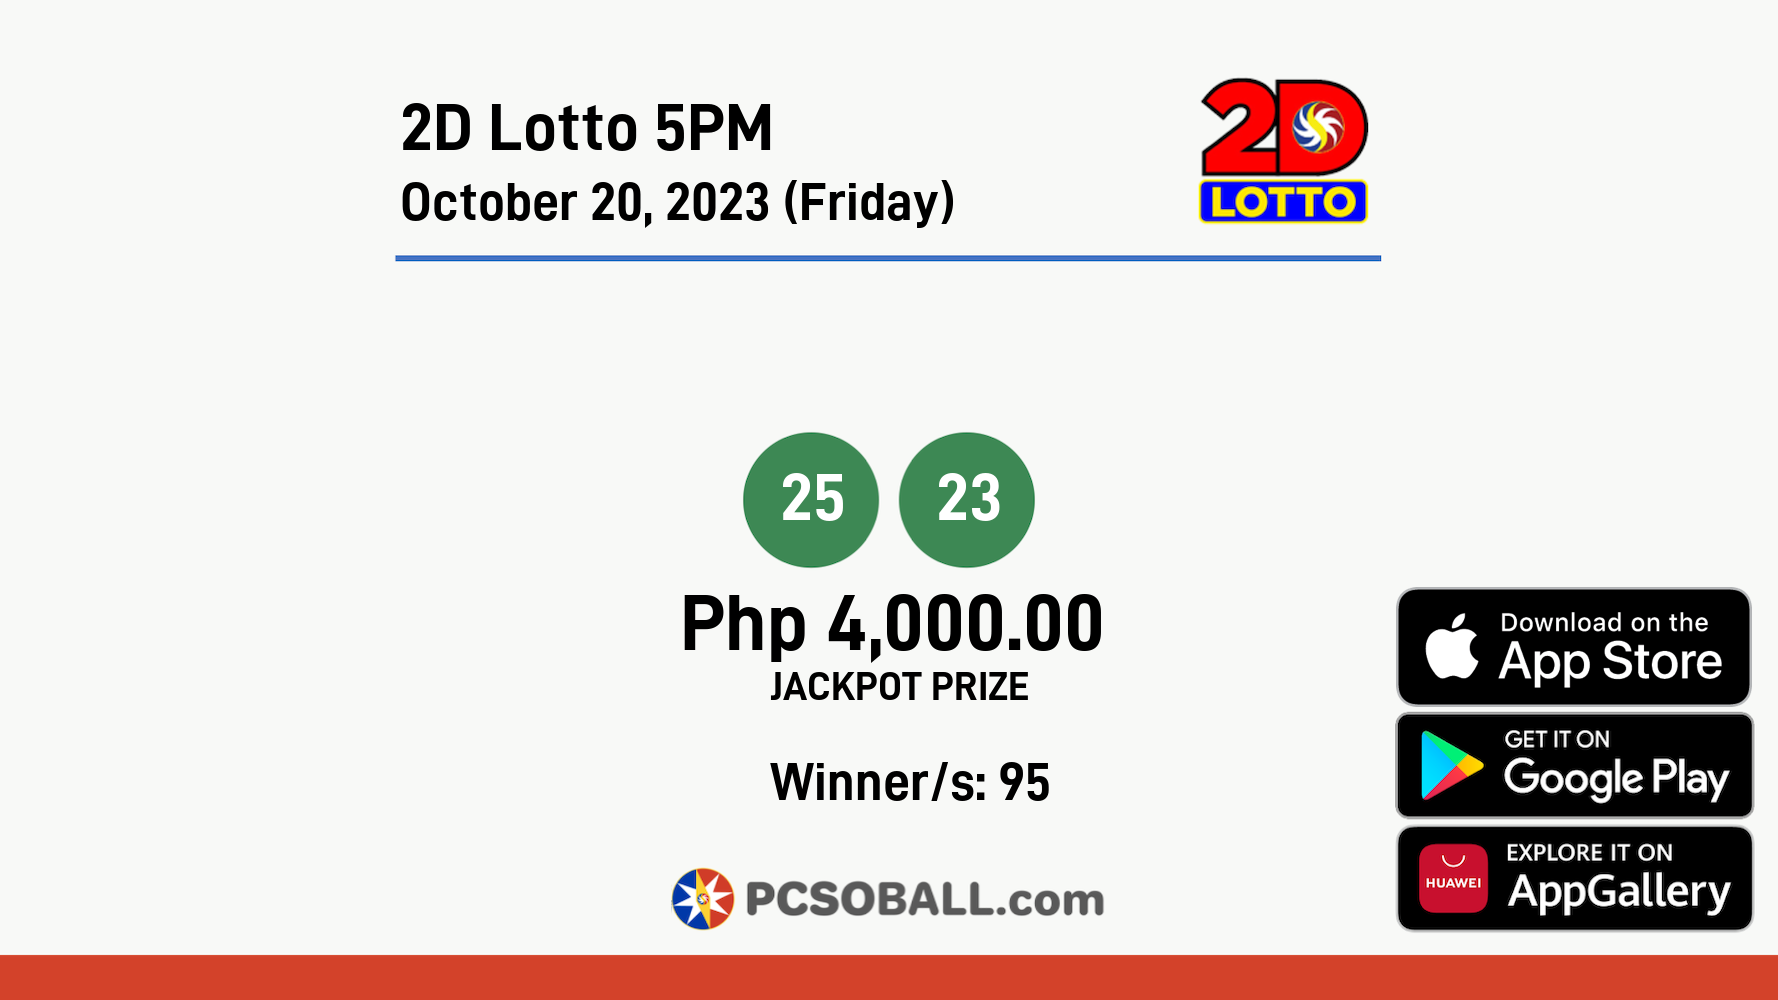 2D Lotto 5PM October 20, 2023 (Friday) Result